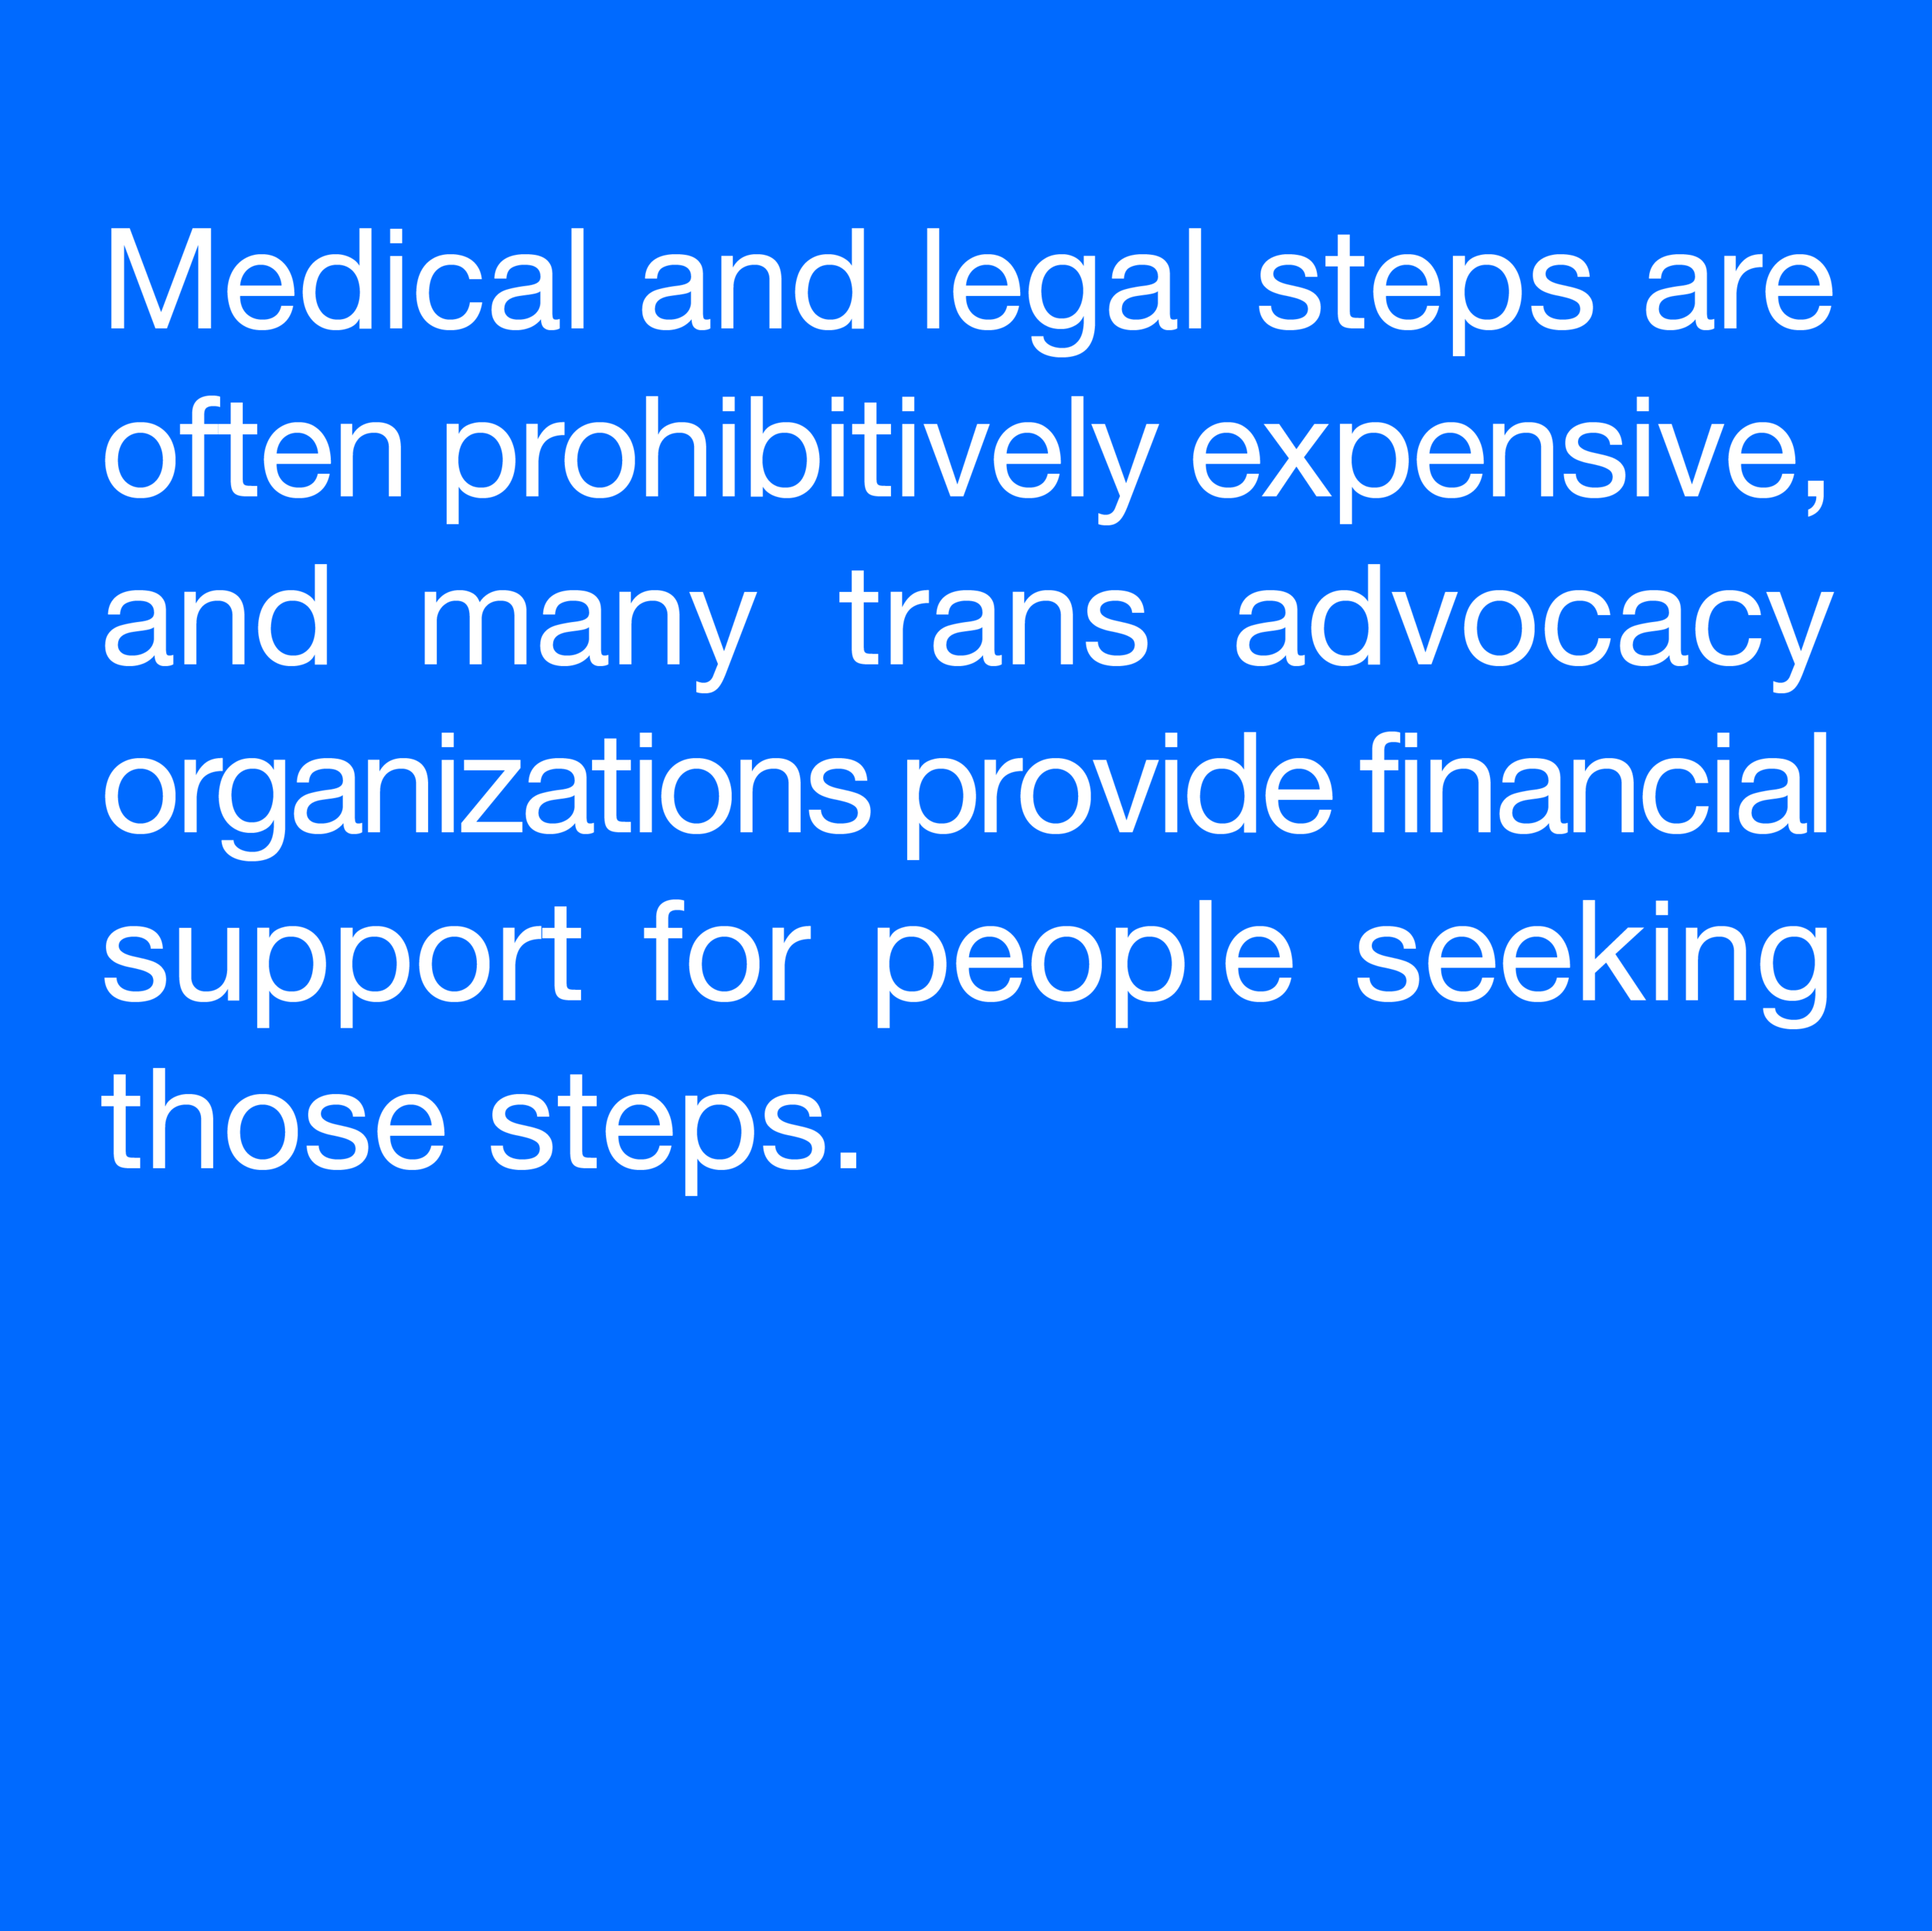  Medical and legal steps are often prohibitively expensive, and many trans advocacy organizations provide financial support for people seeking those steps. 